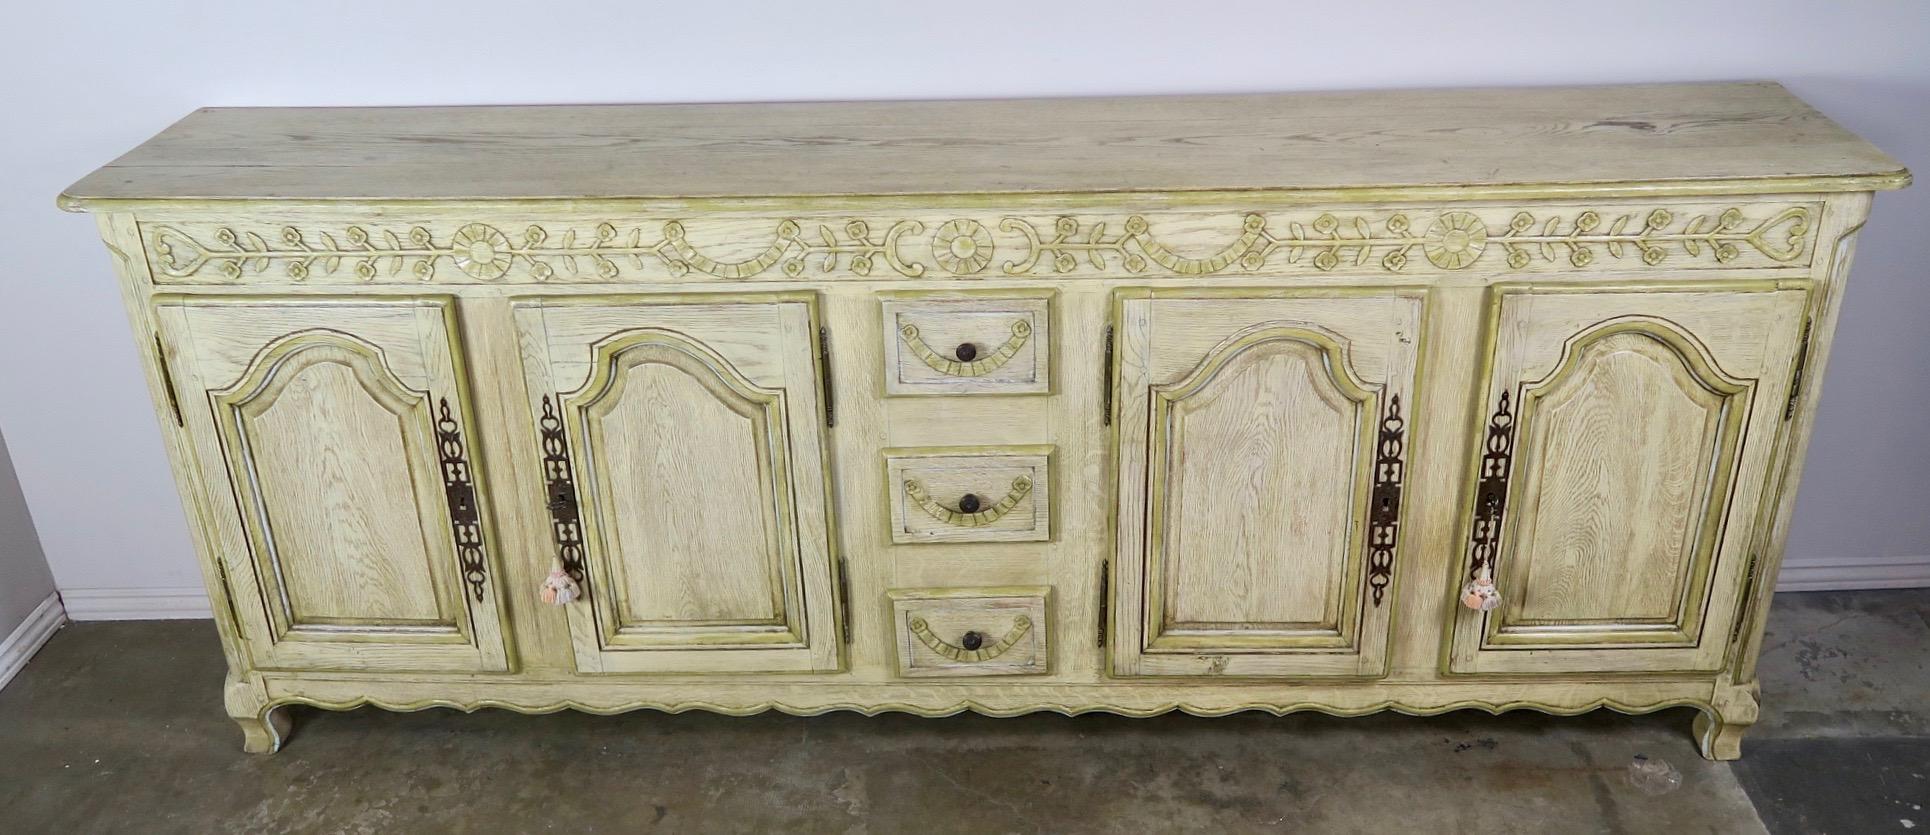 French Provincial French Louis XV Style Painted Sideboard, circa 1900s